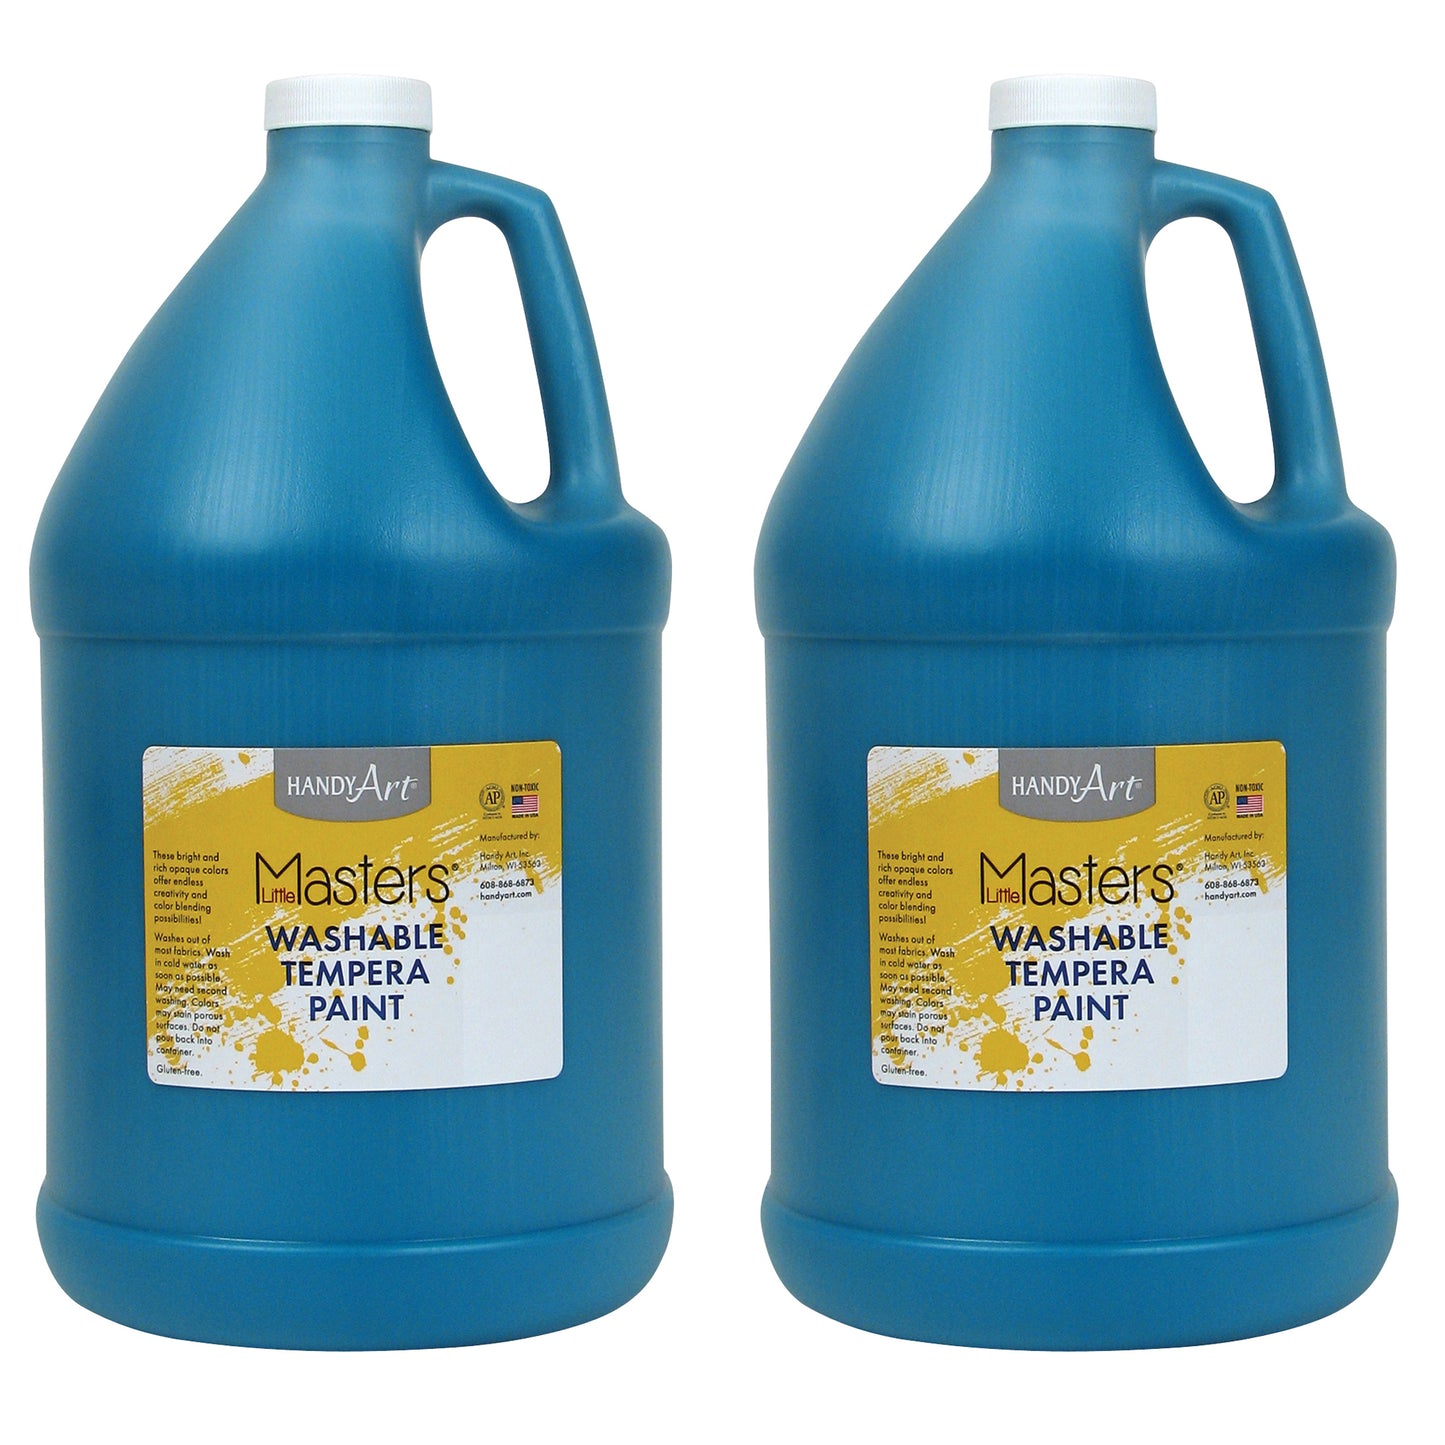 Little Masters® Washable Tempera Paint, Turquoise, Gallon, Pack of 2